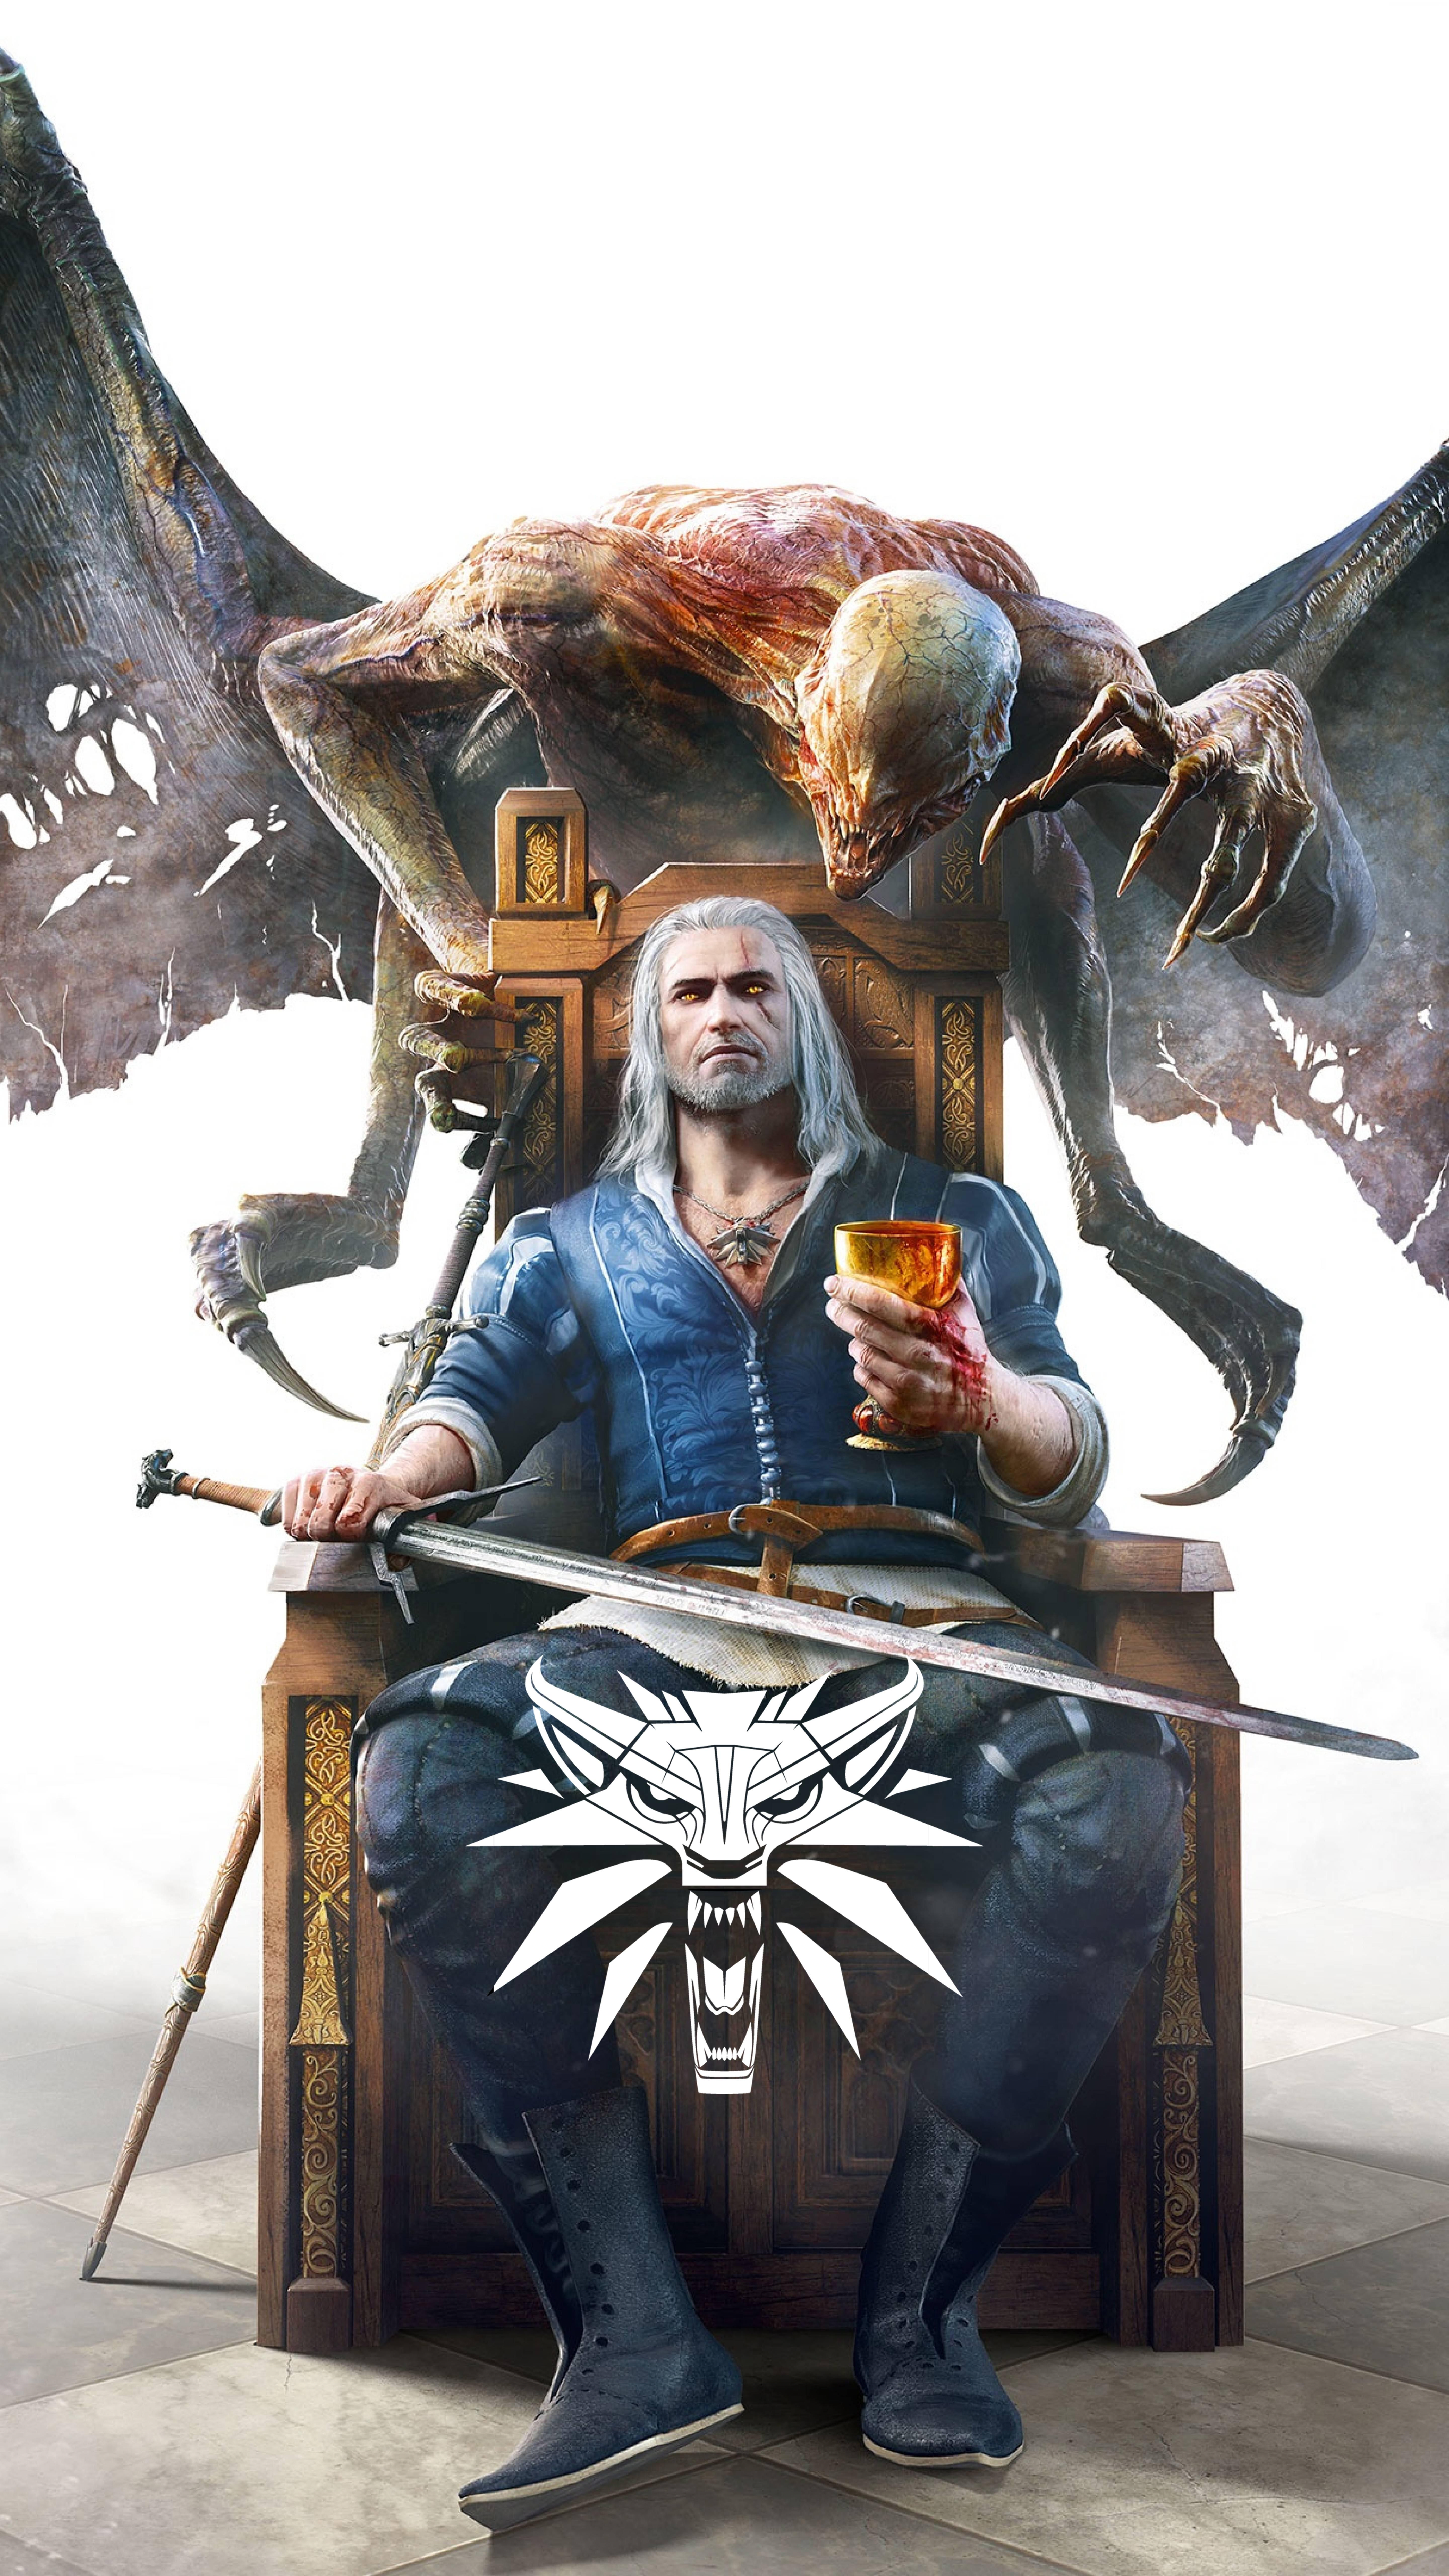 The Witcher 3 Blood And Wine Wallpapers